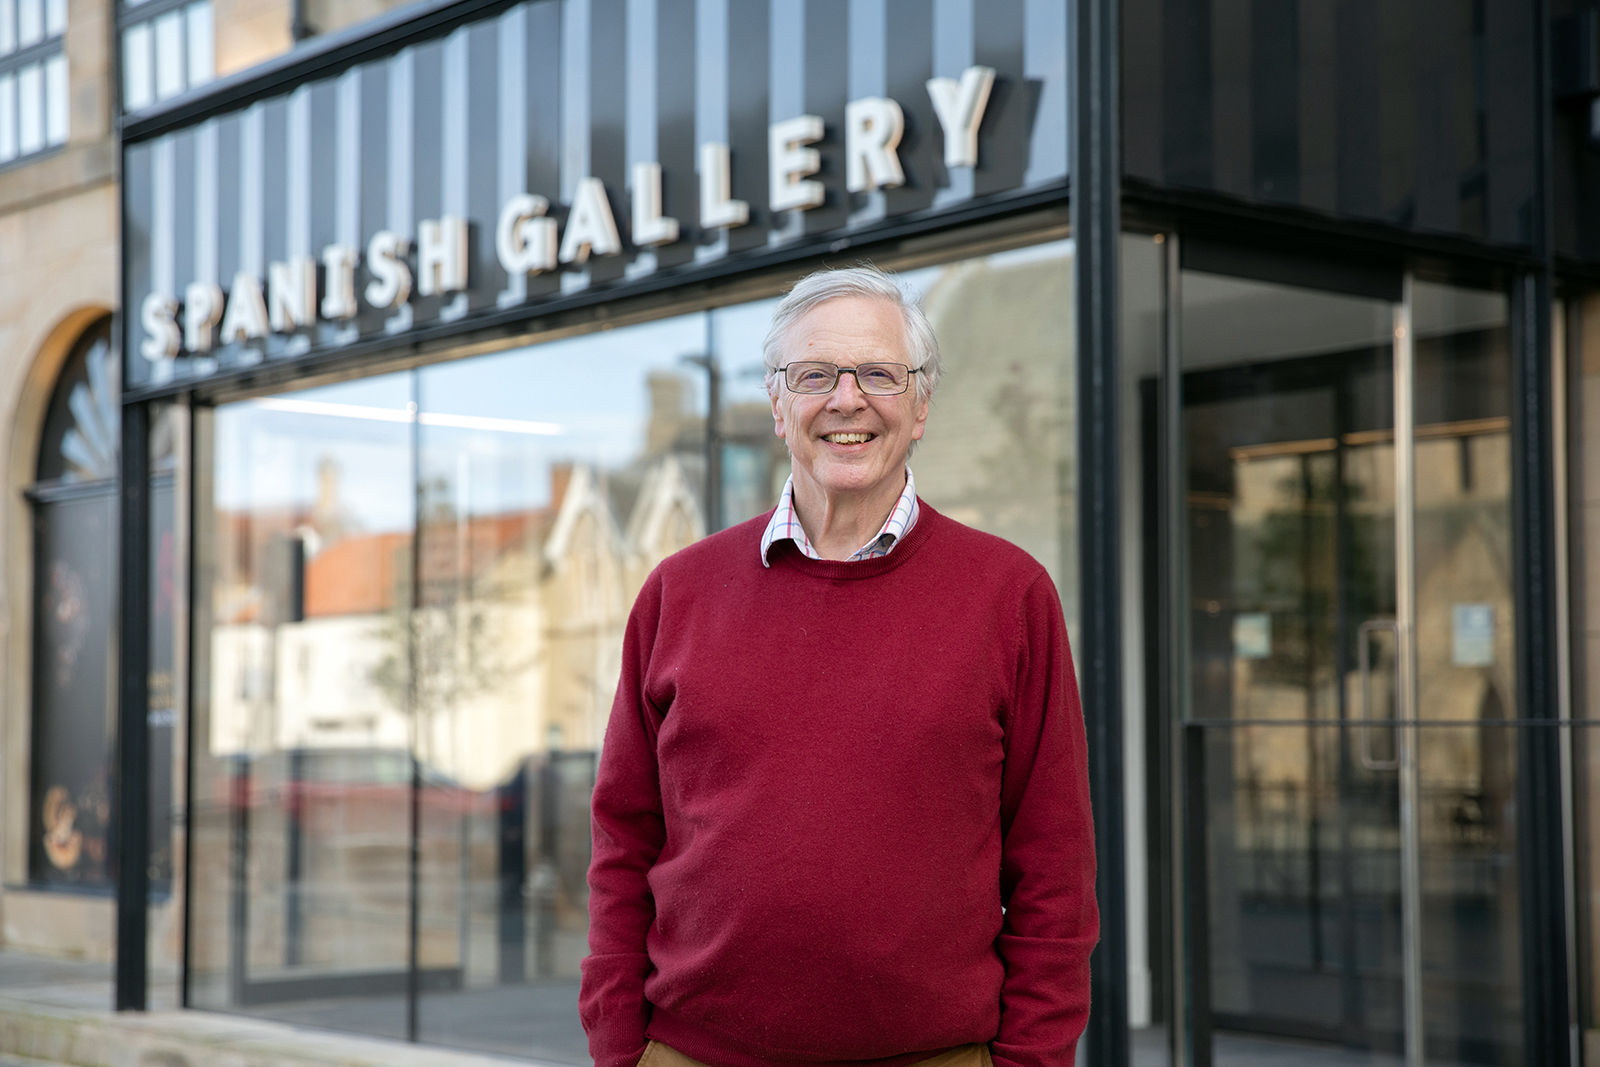 Jonathan Ruffer outside The Spanish Gallery in Bishop Auckland. Photo courtesy House of Hues